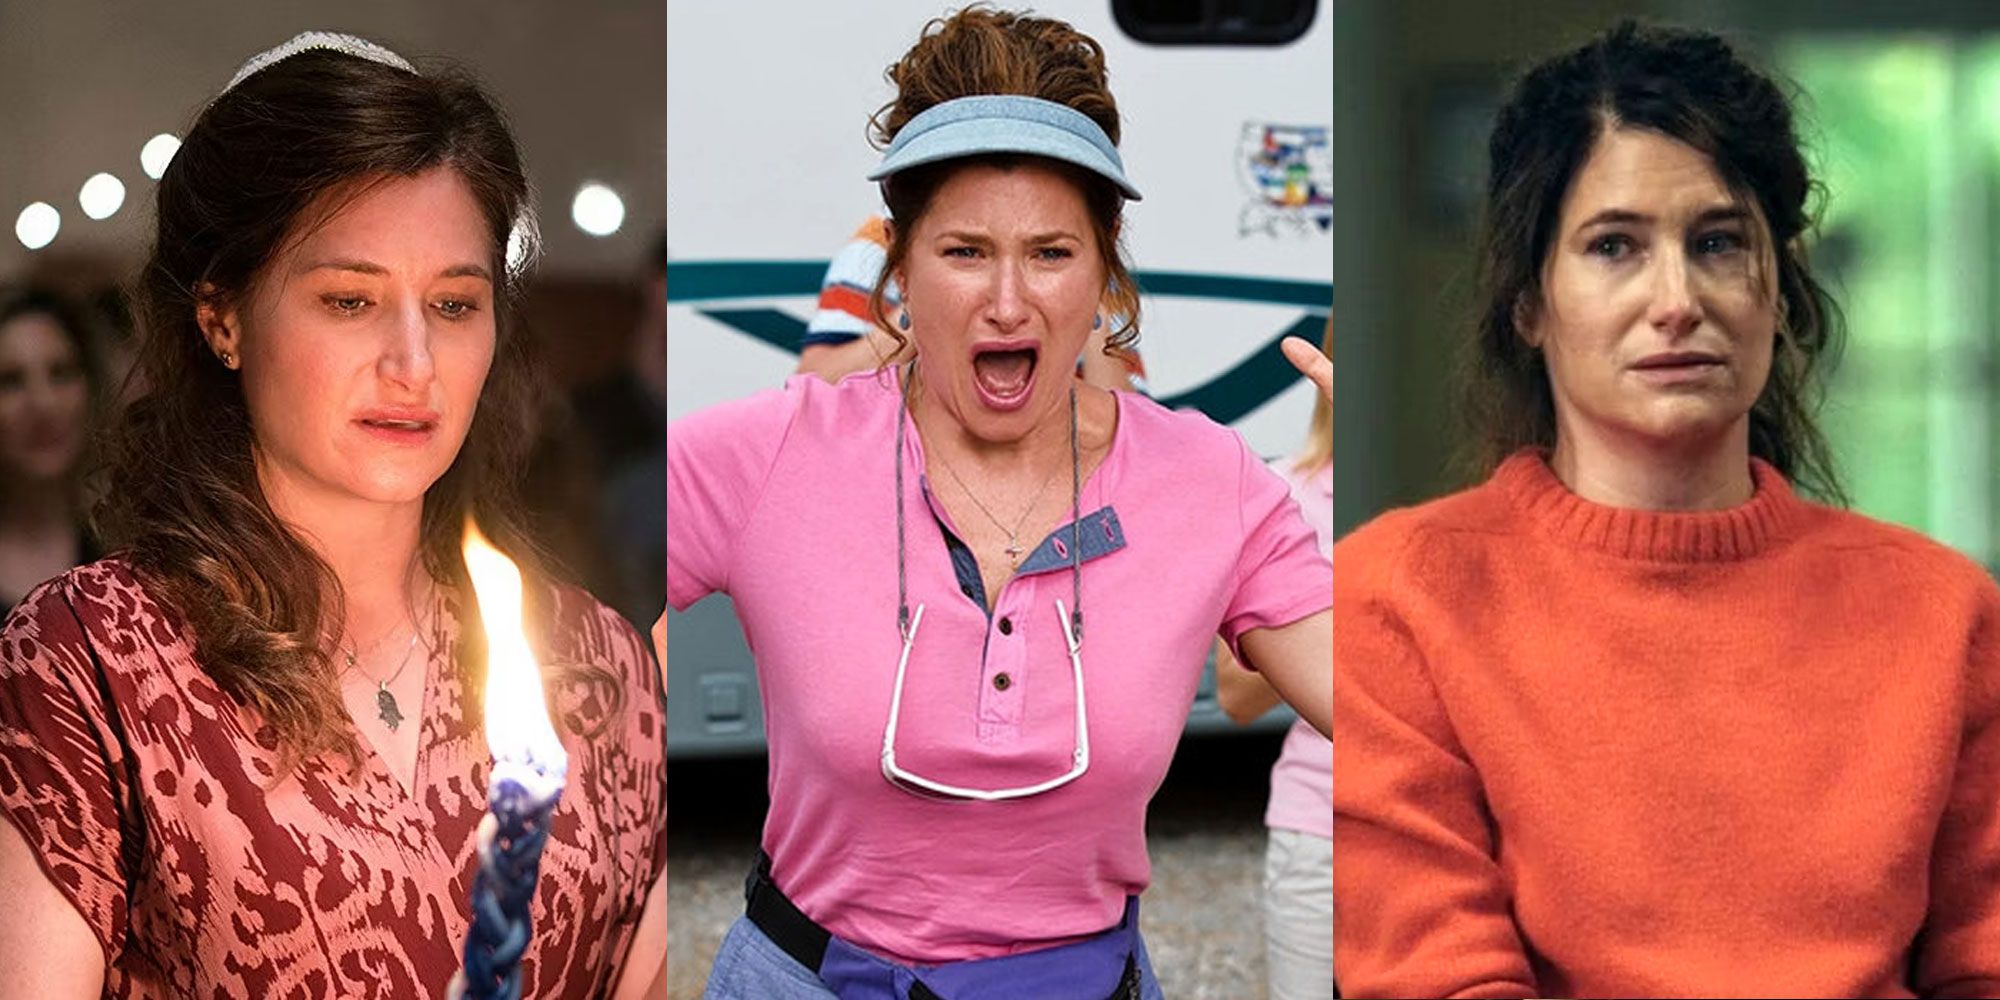 Split image of Kathryn-Hahn in Transparent, We're the Millers and I Know This Much is True